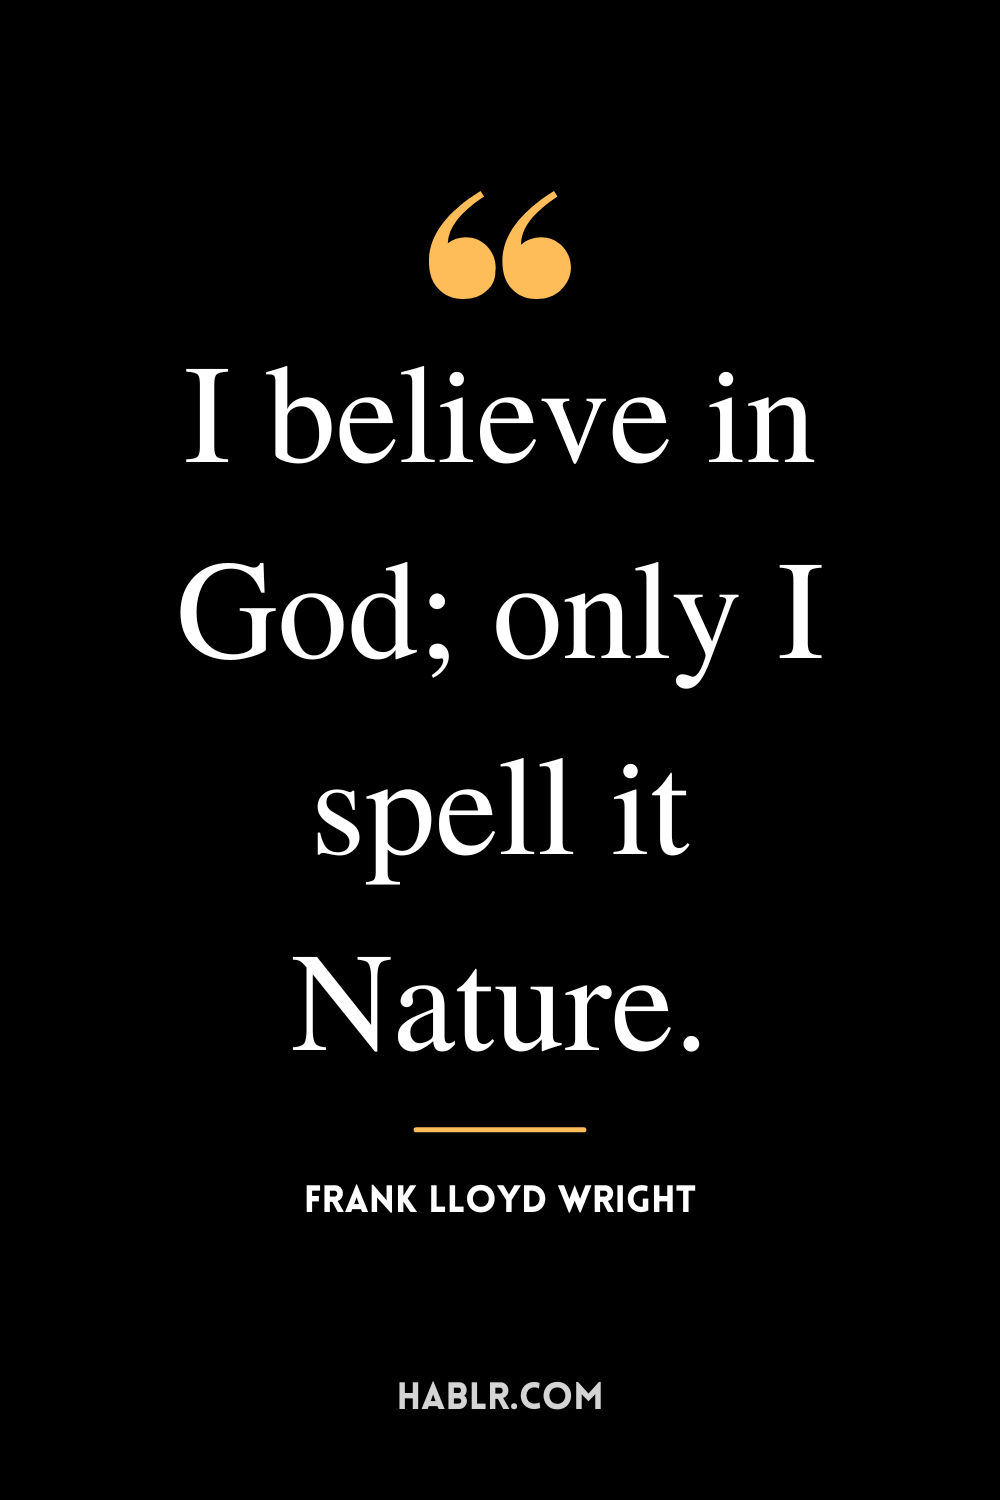 "I believe in God; only I spell it Nature." -Frank Lloyd Wright